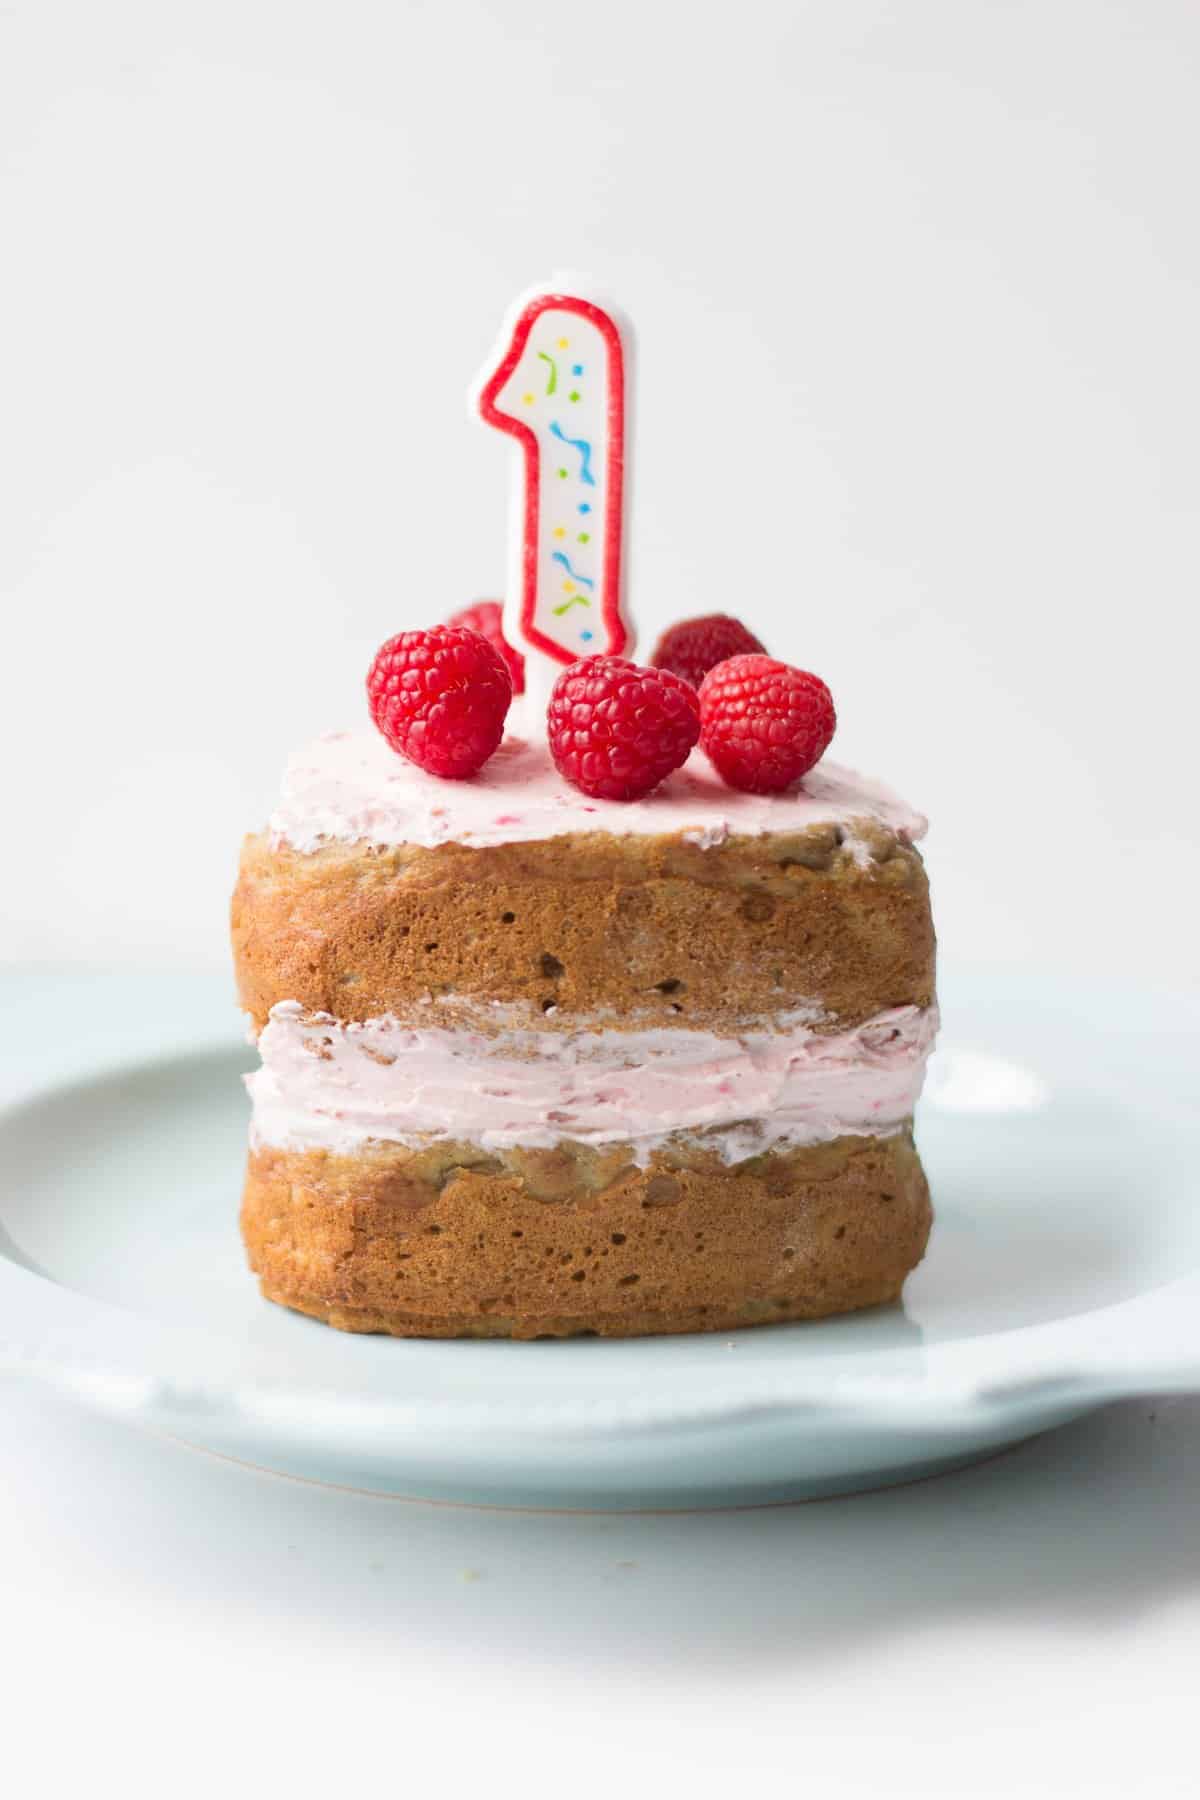 two layered birthday cake with cream cheese frosting in the middle and at the top with fresh raspberries and number 1 candle.